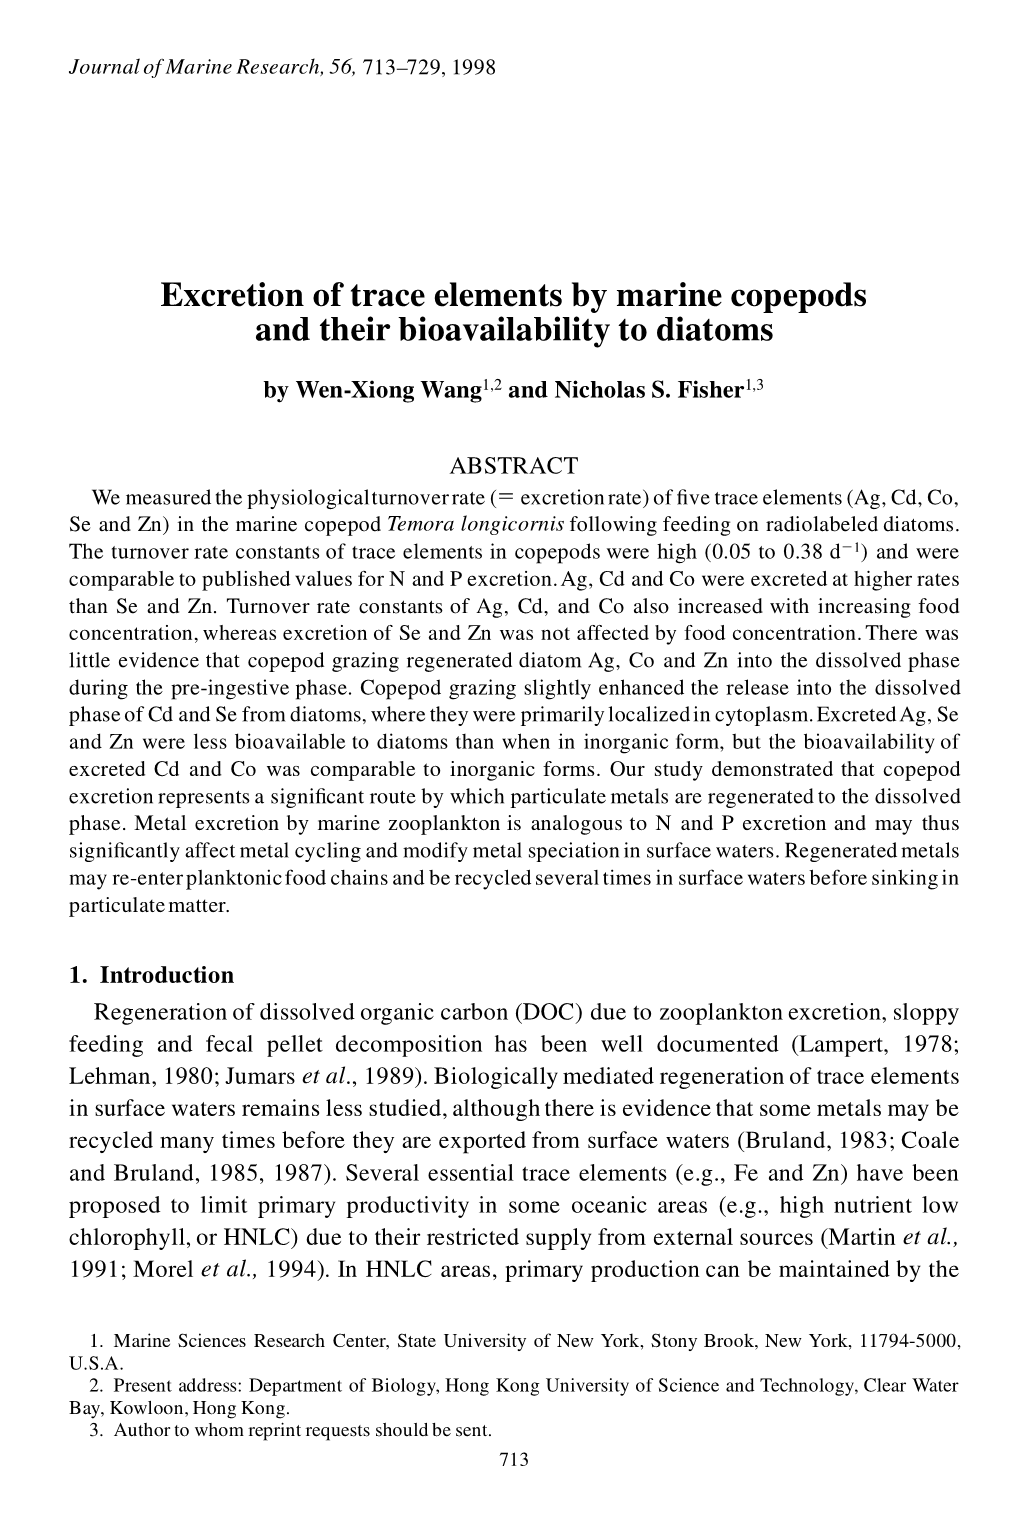 Excretion of Trace Elements by Marine Copepods and Their Bioavailability